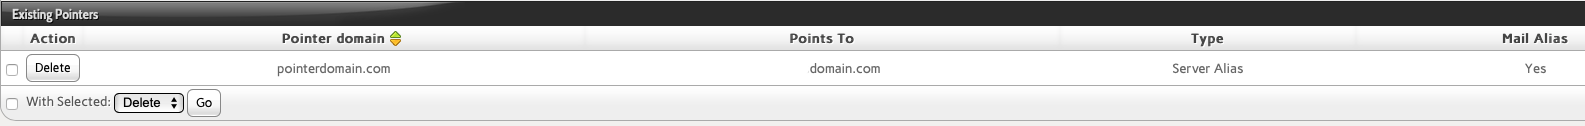 Find the Pointer Domain You Want to Remove and Click Delete and Confirm the Deletion Request